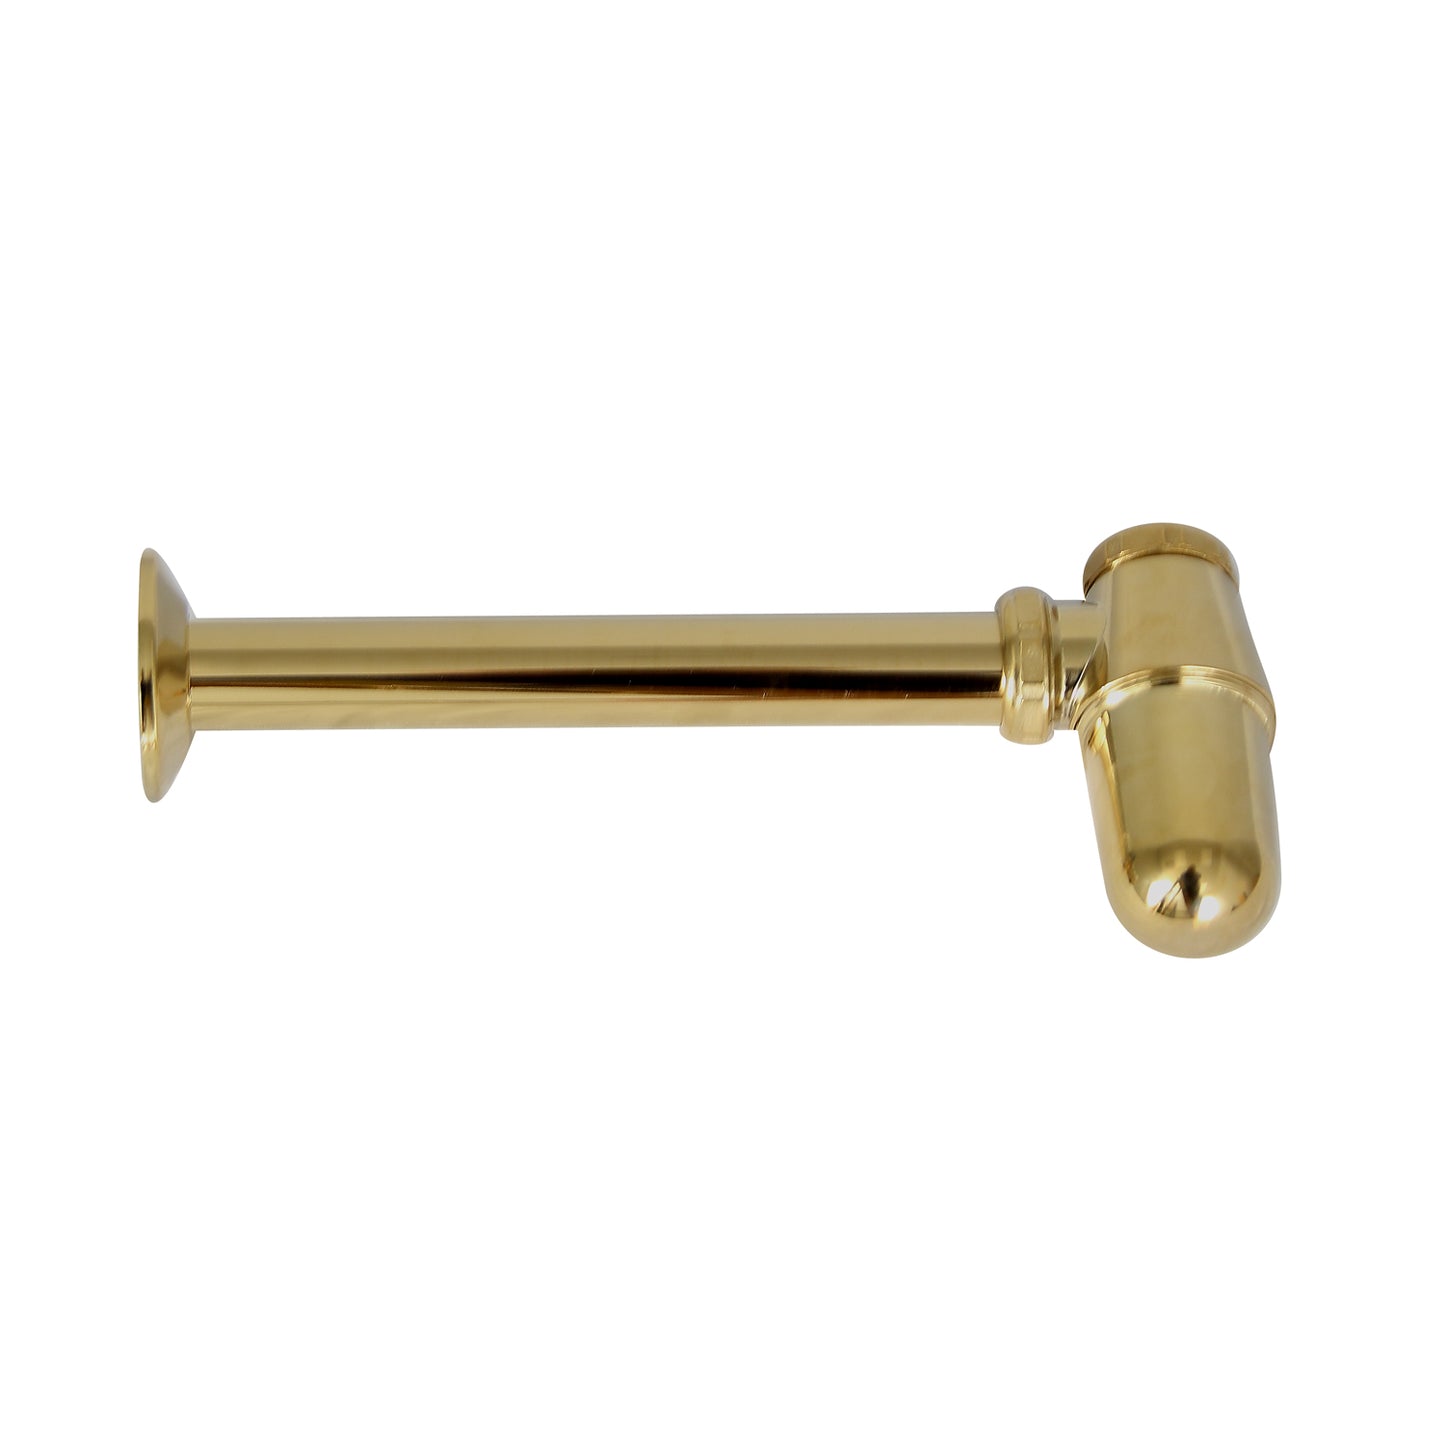 Lavatory Trap with Wall Flange Polished Brass